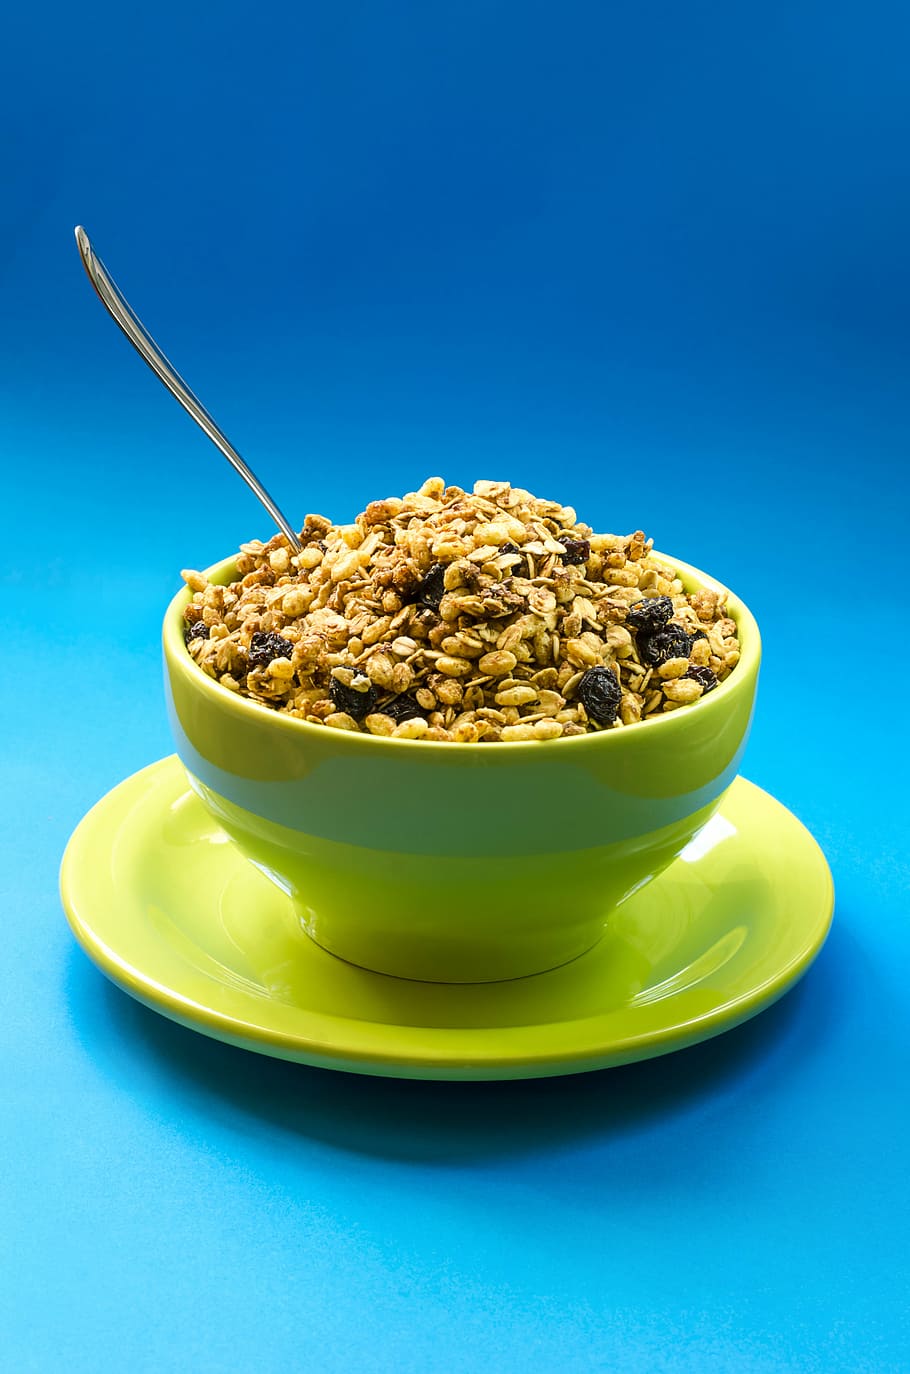 green, bowl, filled, cereal, food, plate, spoon, raisins, peanut, blue background